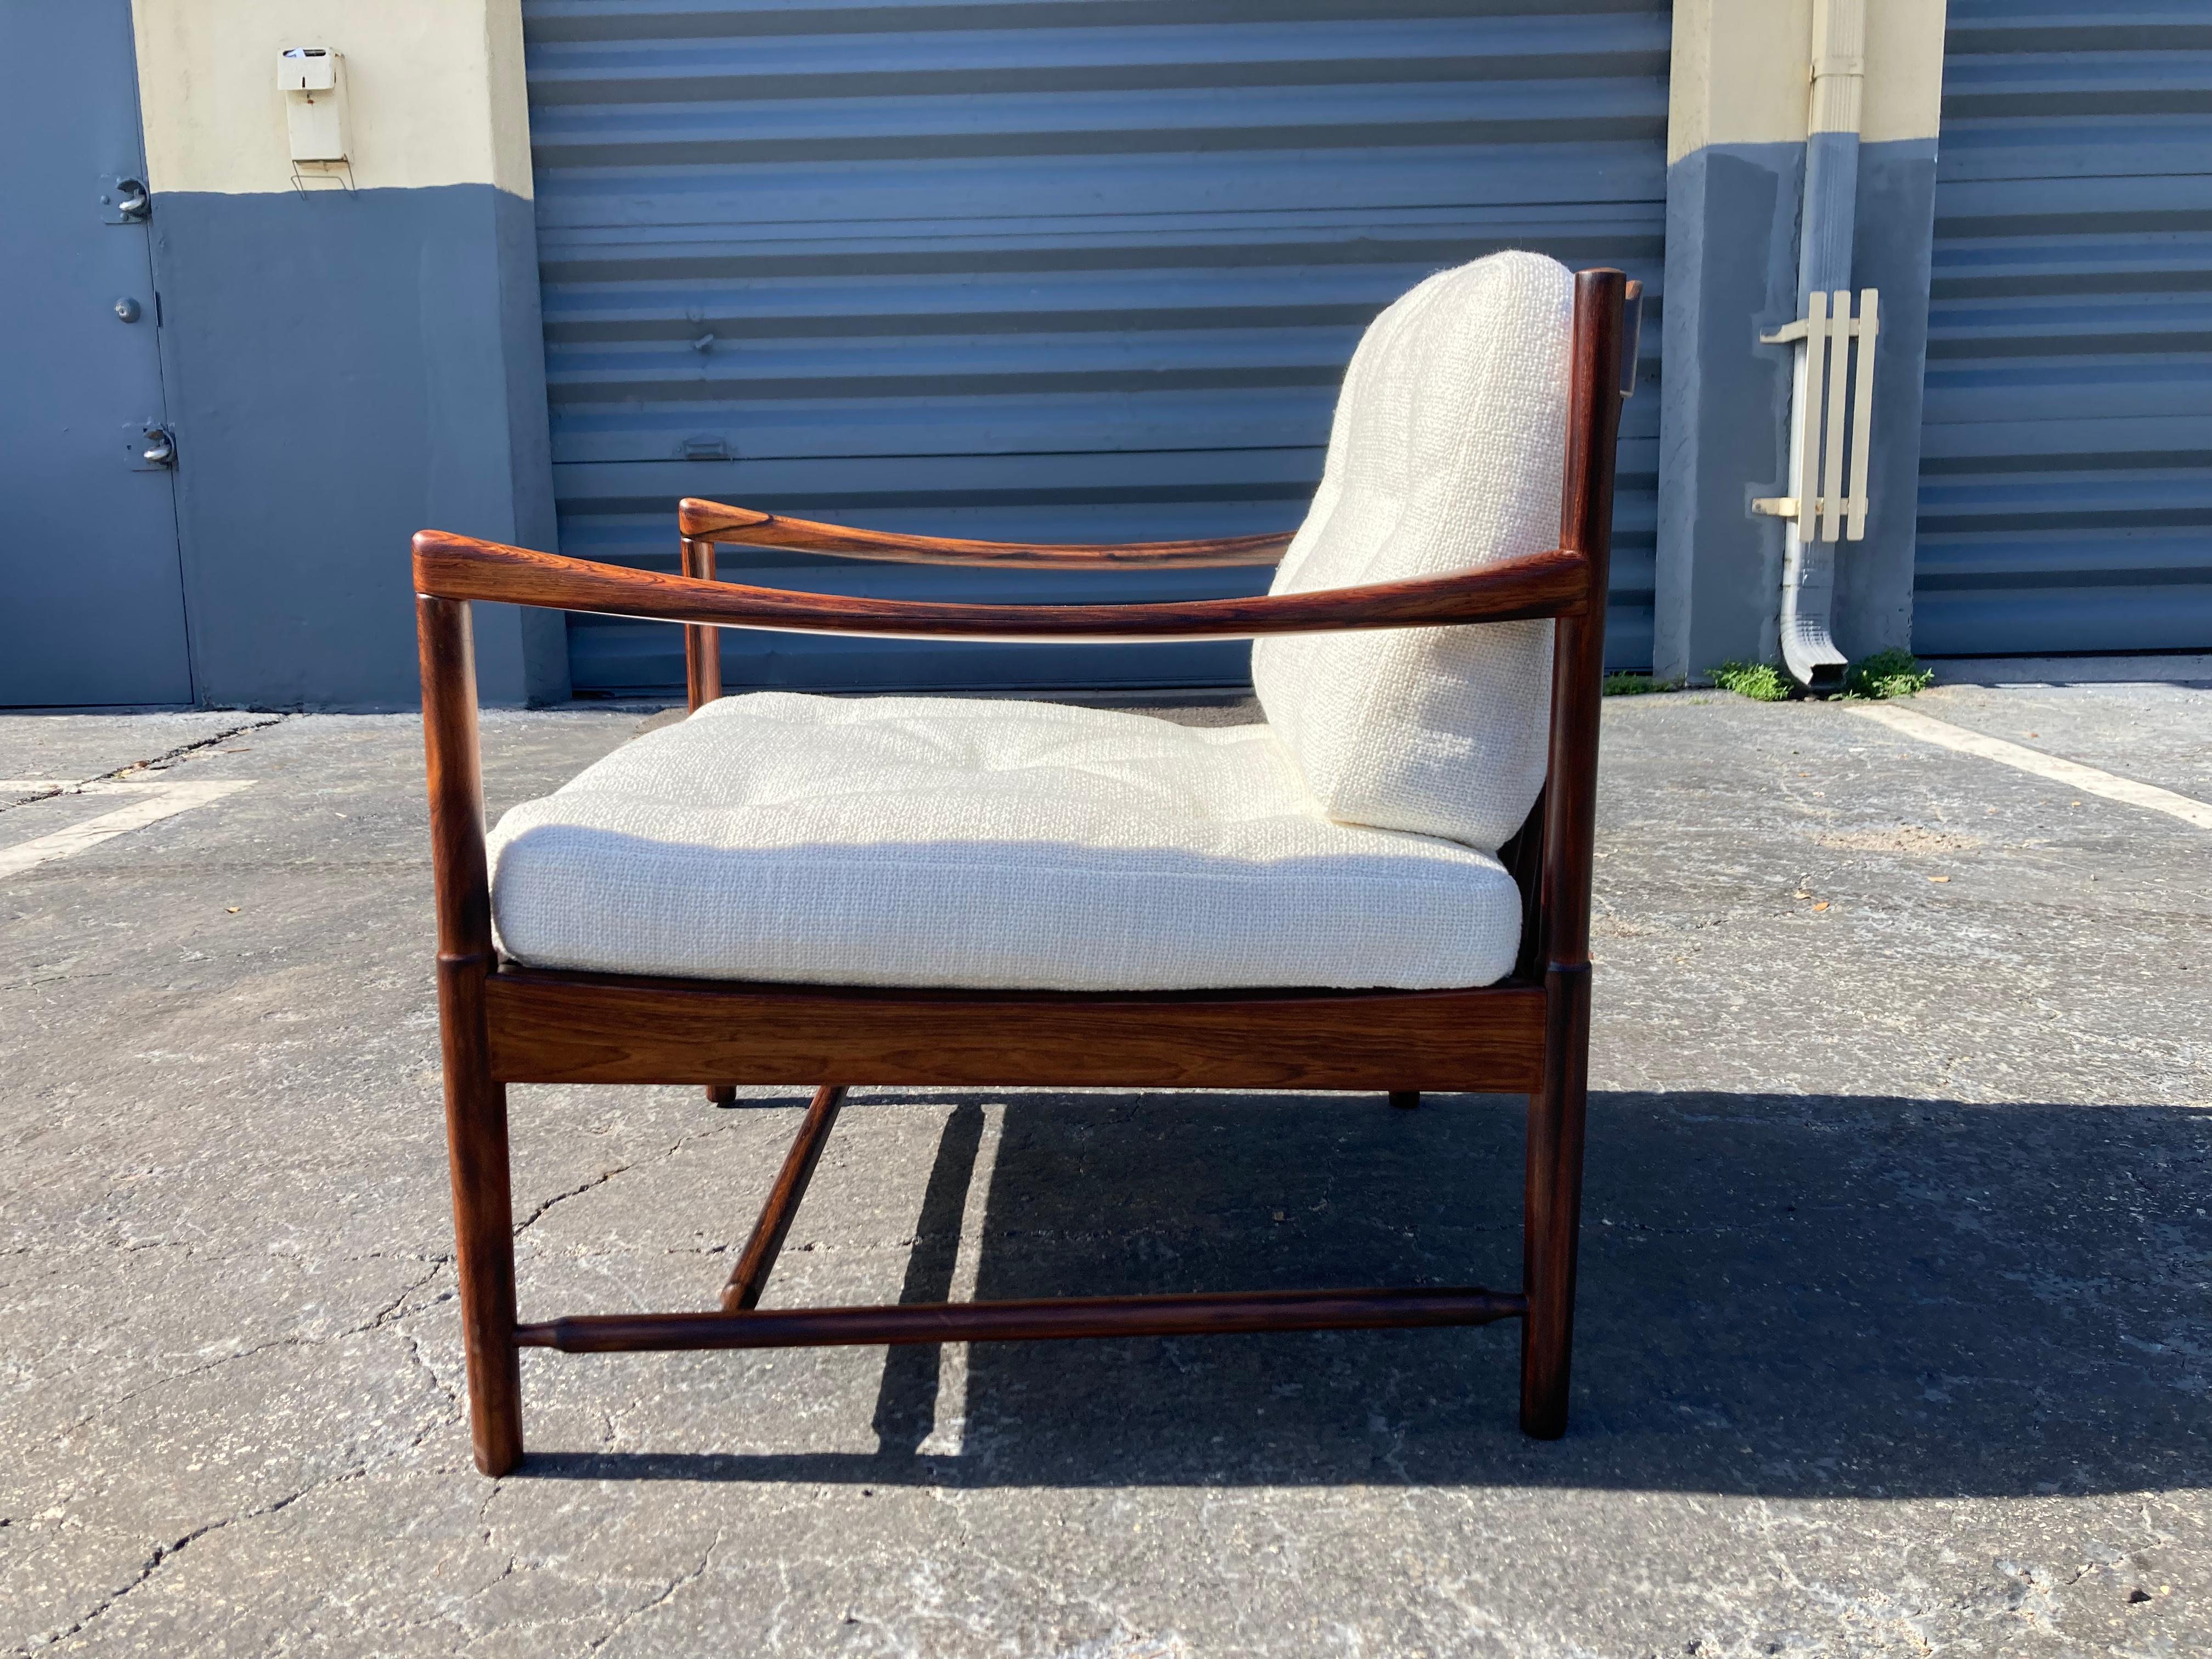 Pair of Rosewood Lounge Chairs Attributed to Kofod Larsen, Danish Modern For Sale 1